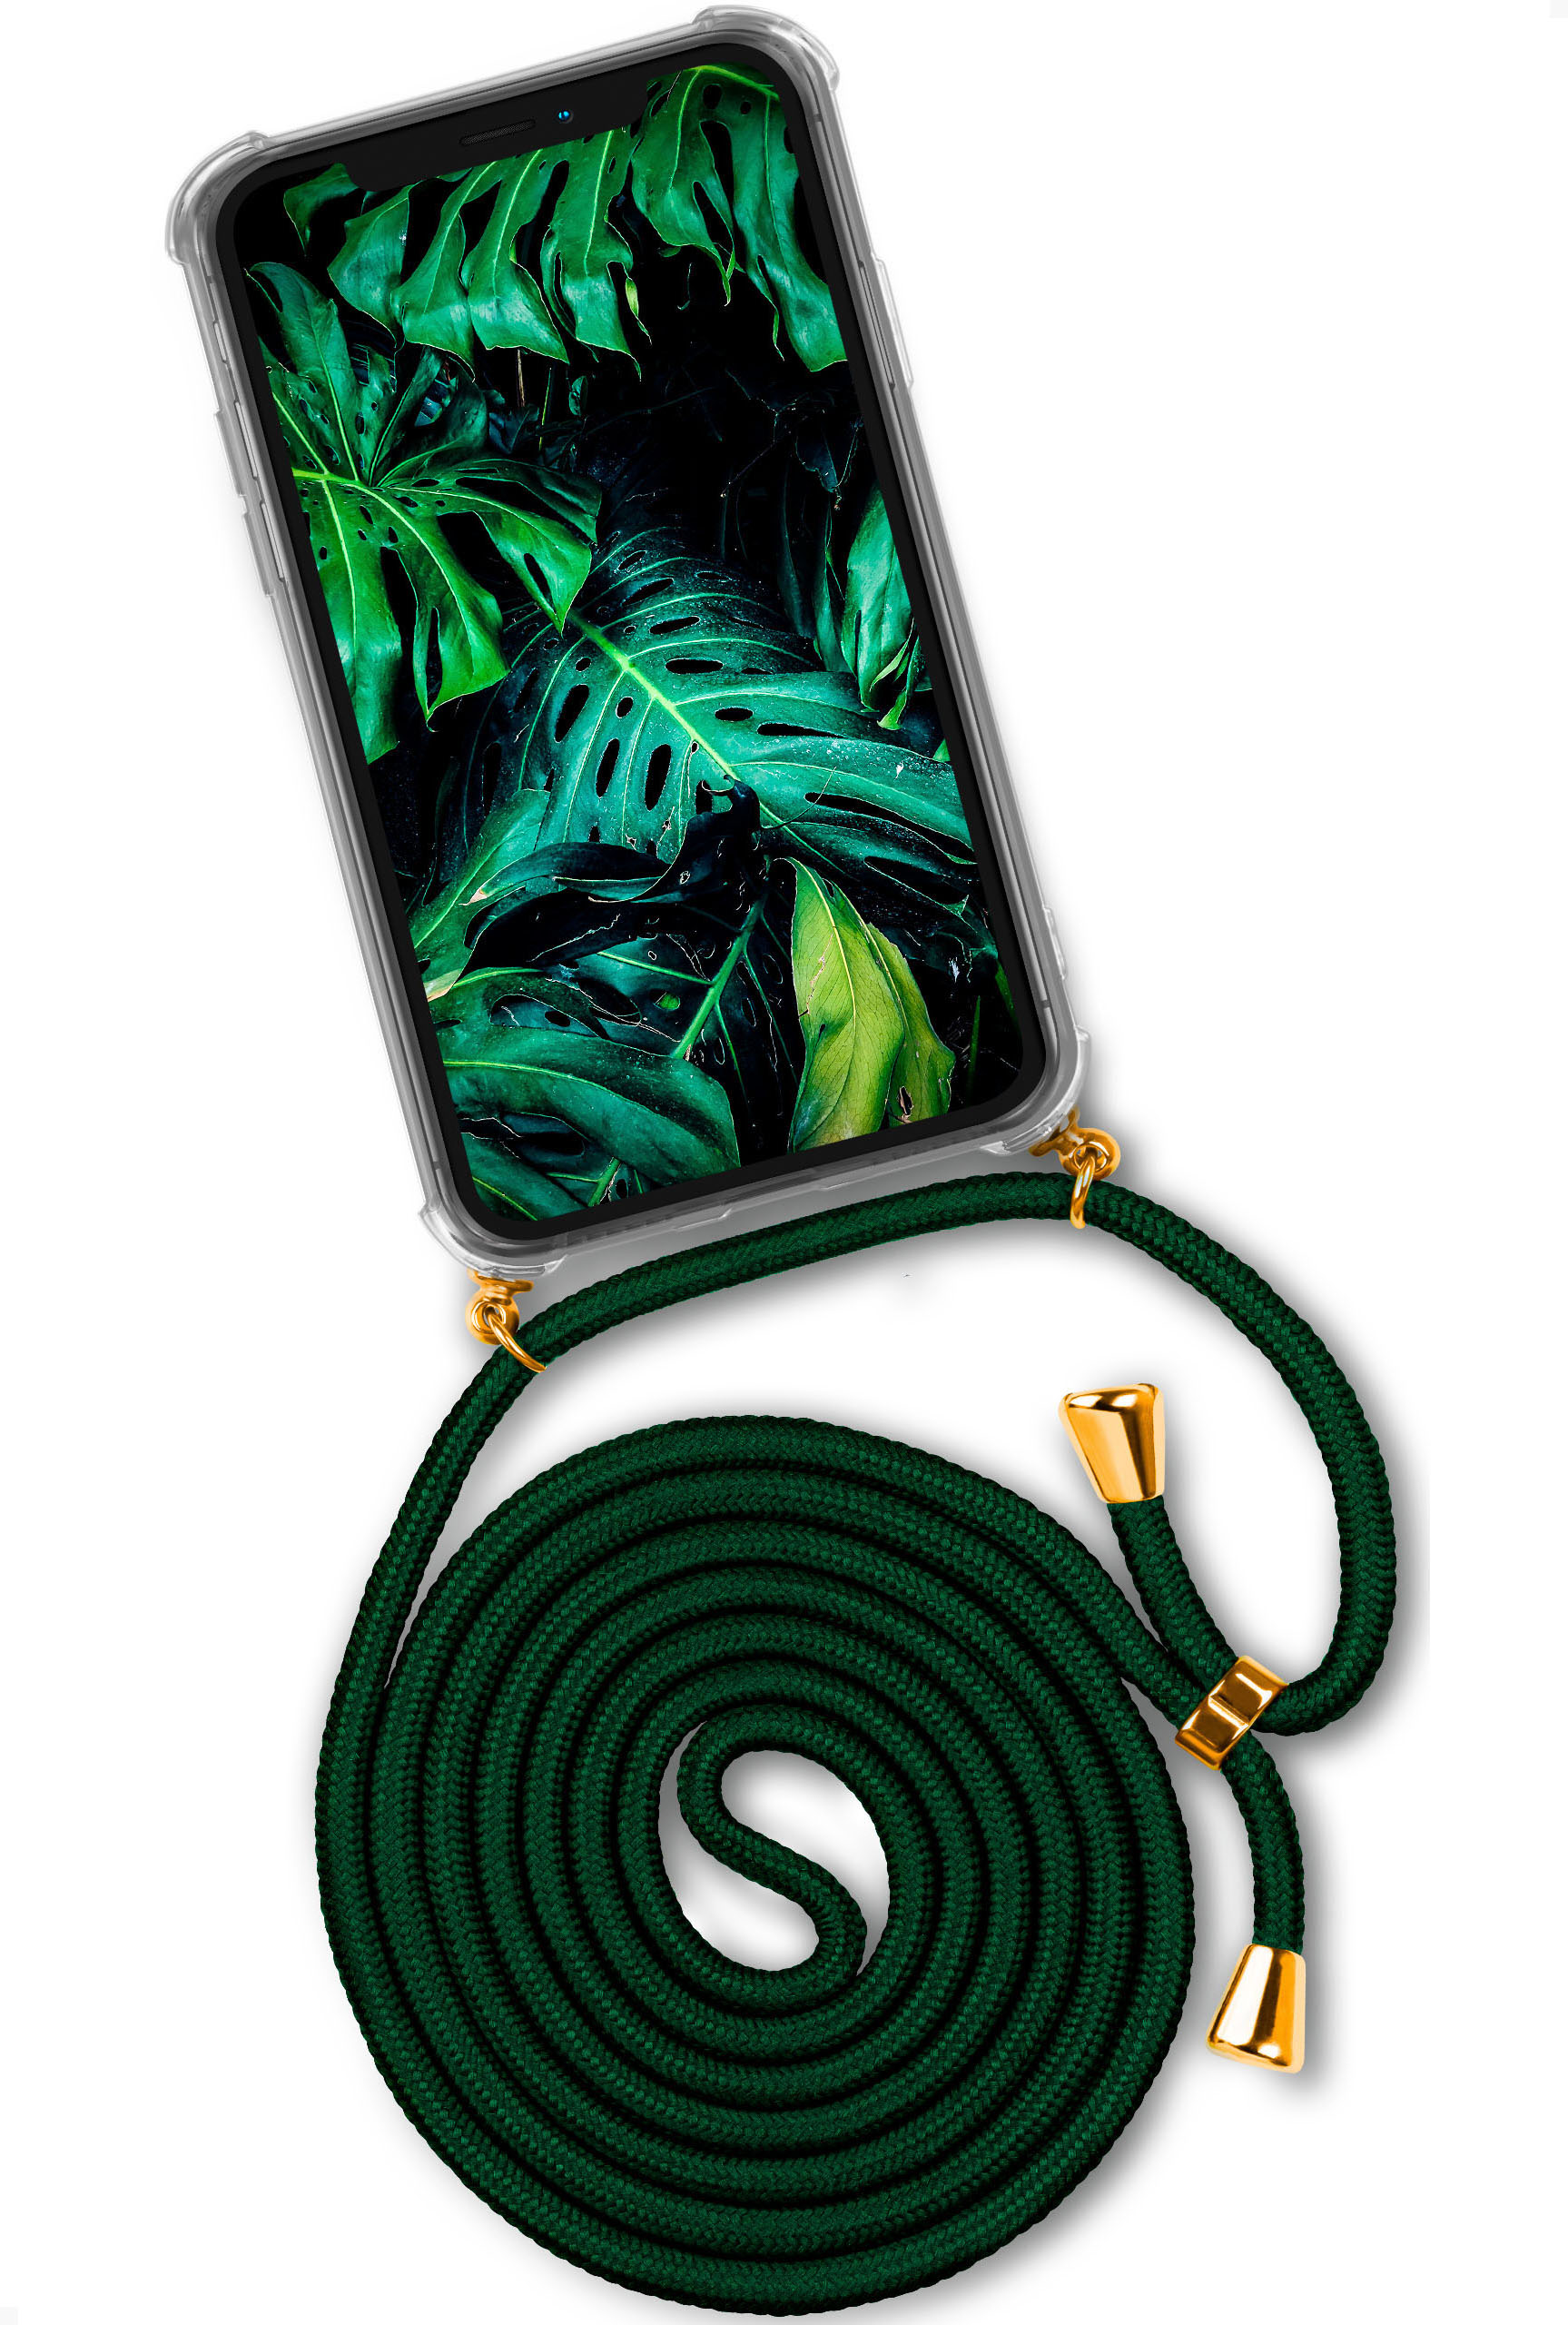 Twist 12 Apple, (Gold) Deepest Pro, ONEFLOW 12 iPhone / Backcover, Jungle Case,